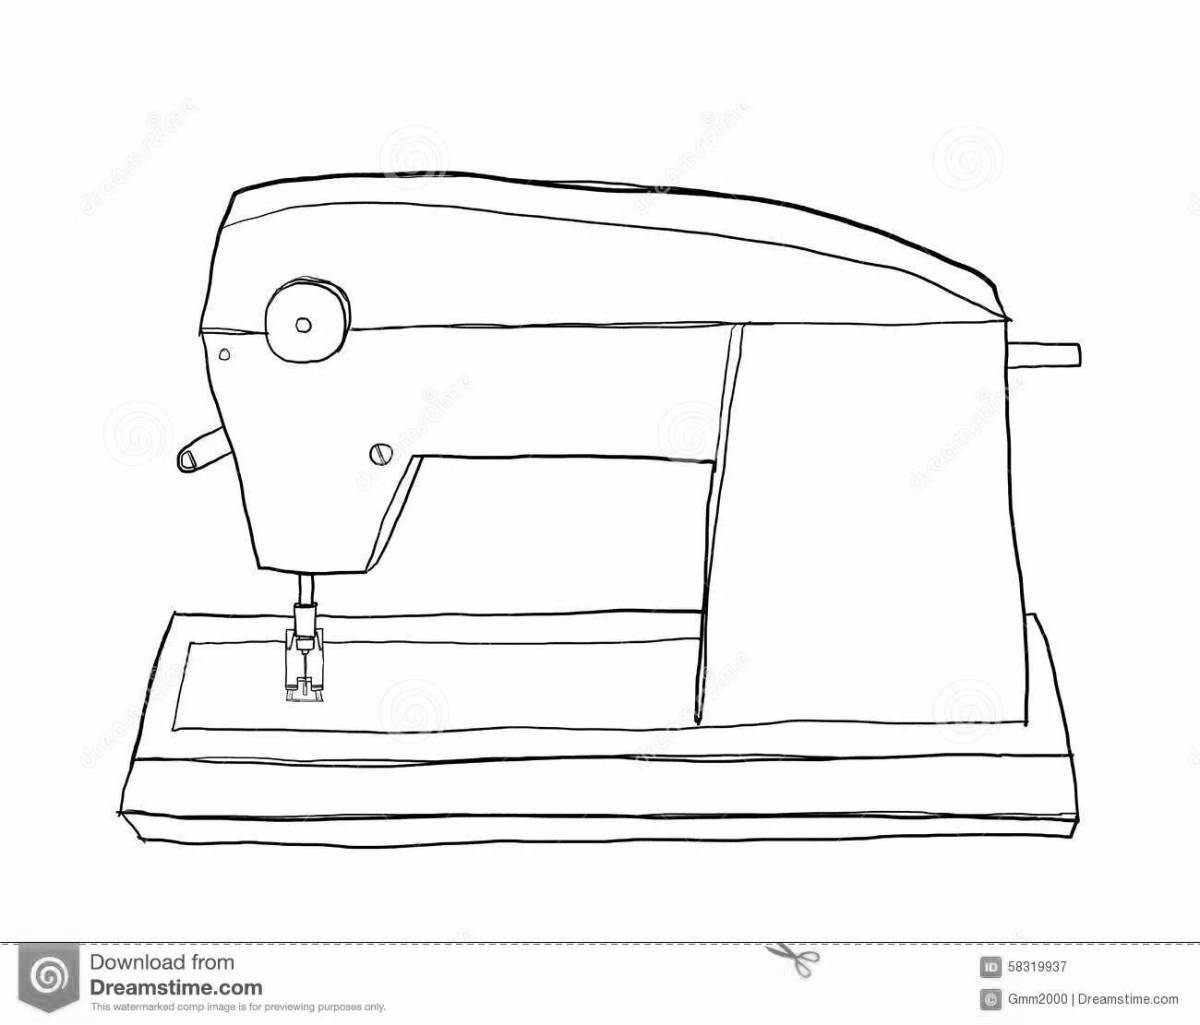 Great sewing machine coloring page